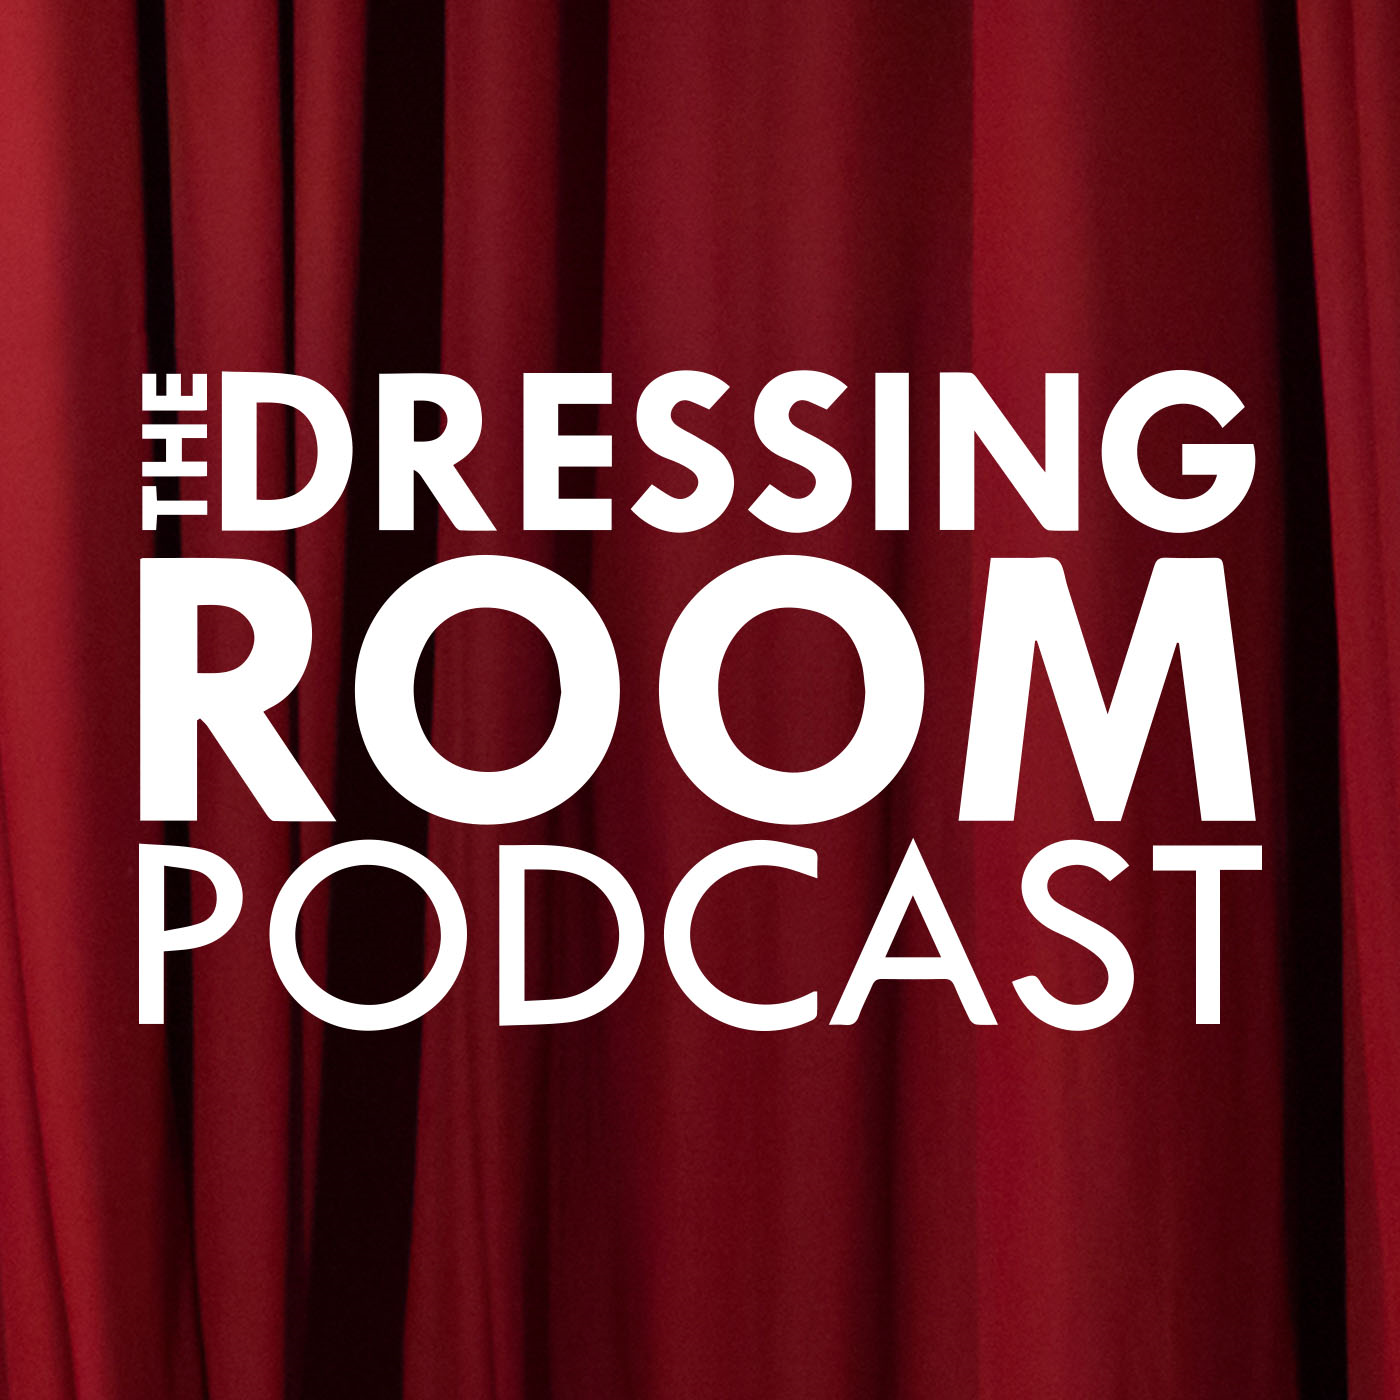 THE DRESSING ROOM PODCAST - EPISODE 3 - MICHAEL CASSEL